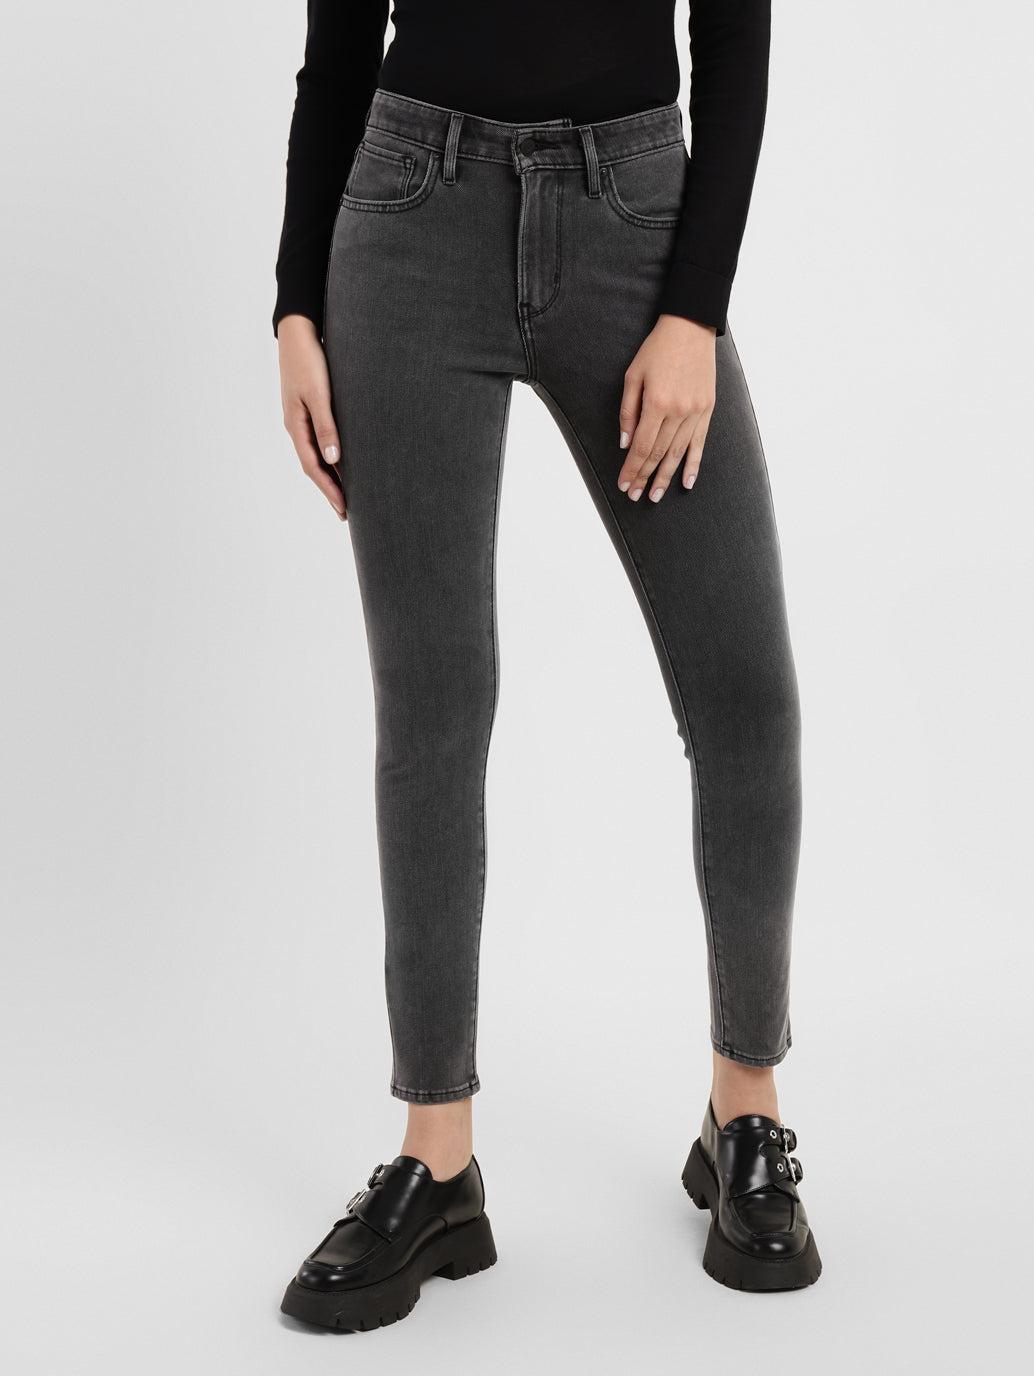 women's-high-rise-721-skinny-fit-jeans